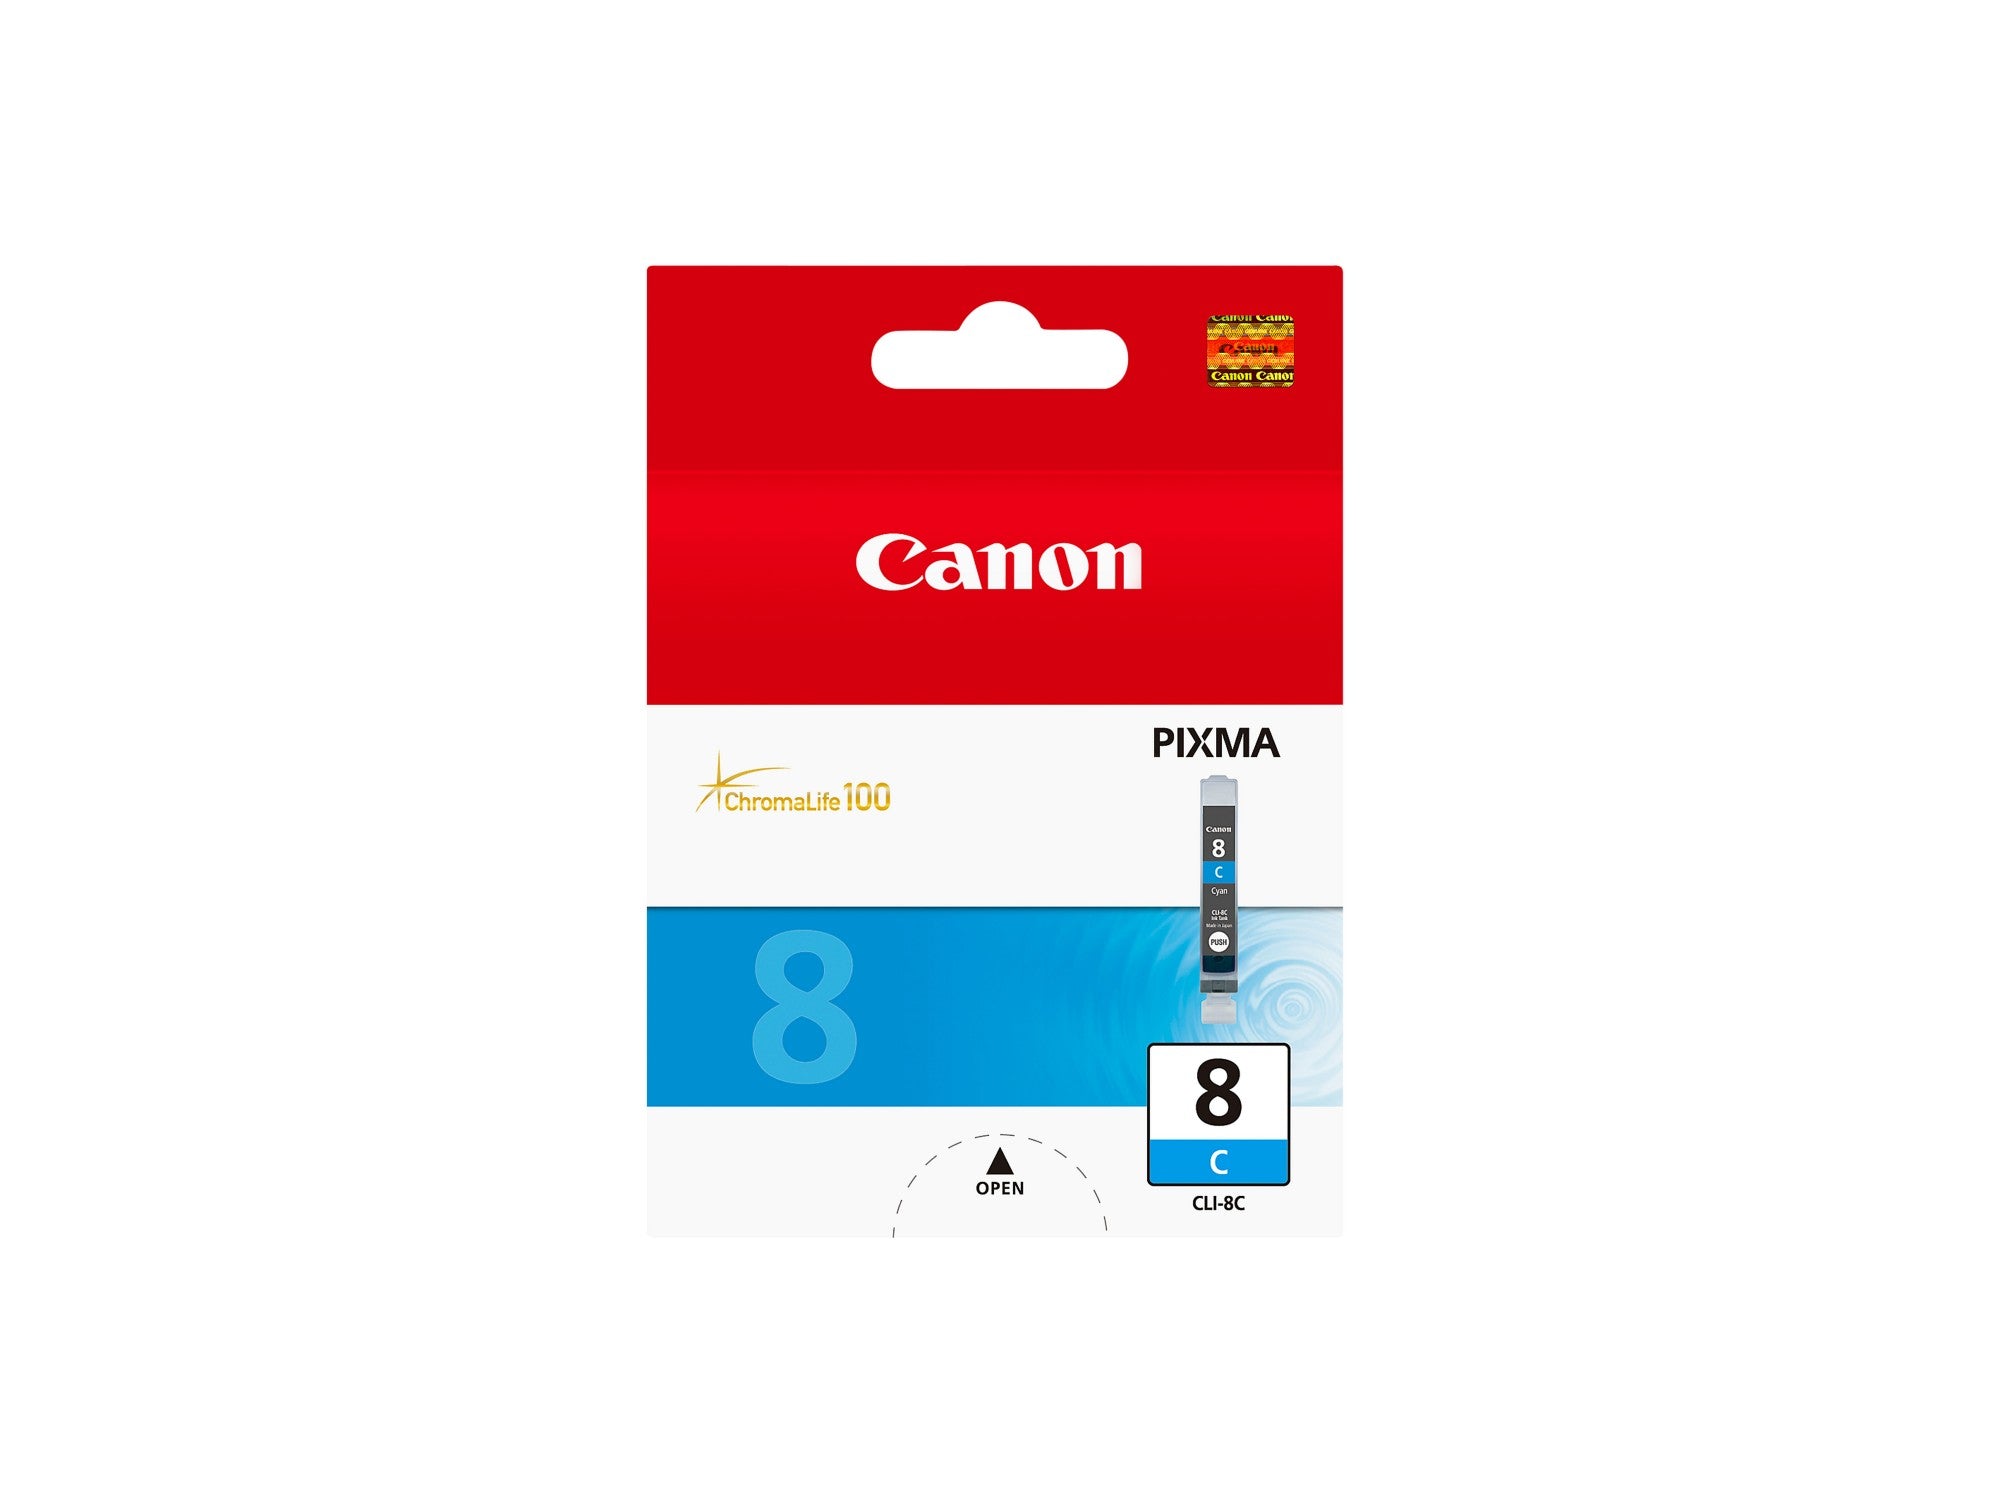 Canon 0621B001/CLI-8C Ink cartridge cyan, 420 pages ISO/IEC 24711 13ml for Canon Pixma IP 3300/4200/6600/MP 960/Pro 9000